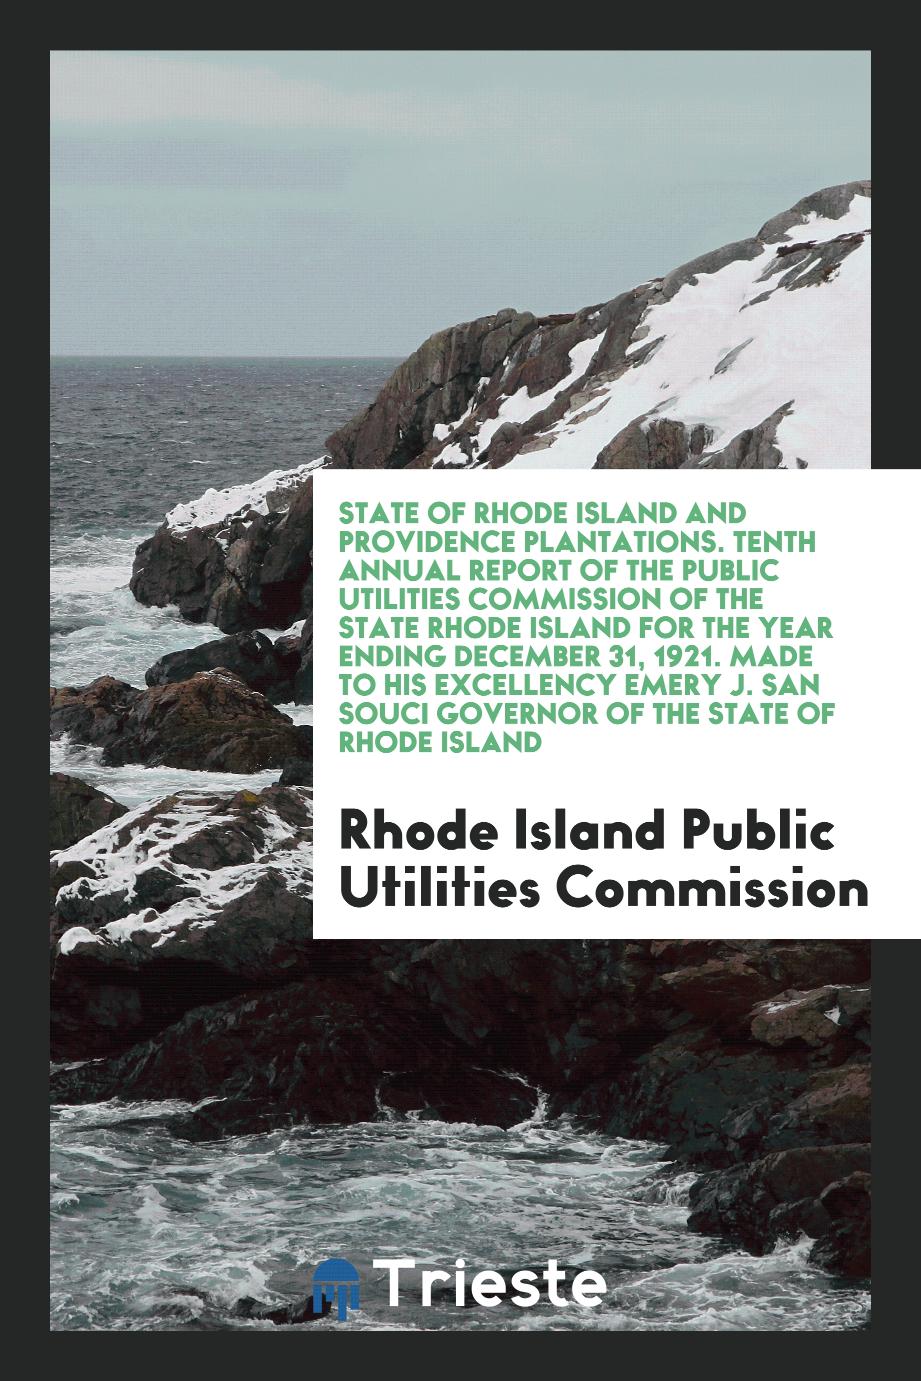 State of Rhode Island and Providence Plantations. Tenth Annual Report of the Public Utilities Commission of the State Rhode Island for the Year Ending December 31, 1921. Made to His Excellency Emery J. San Souci Governor of the State of Rhode Island